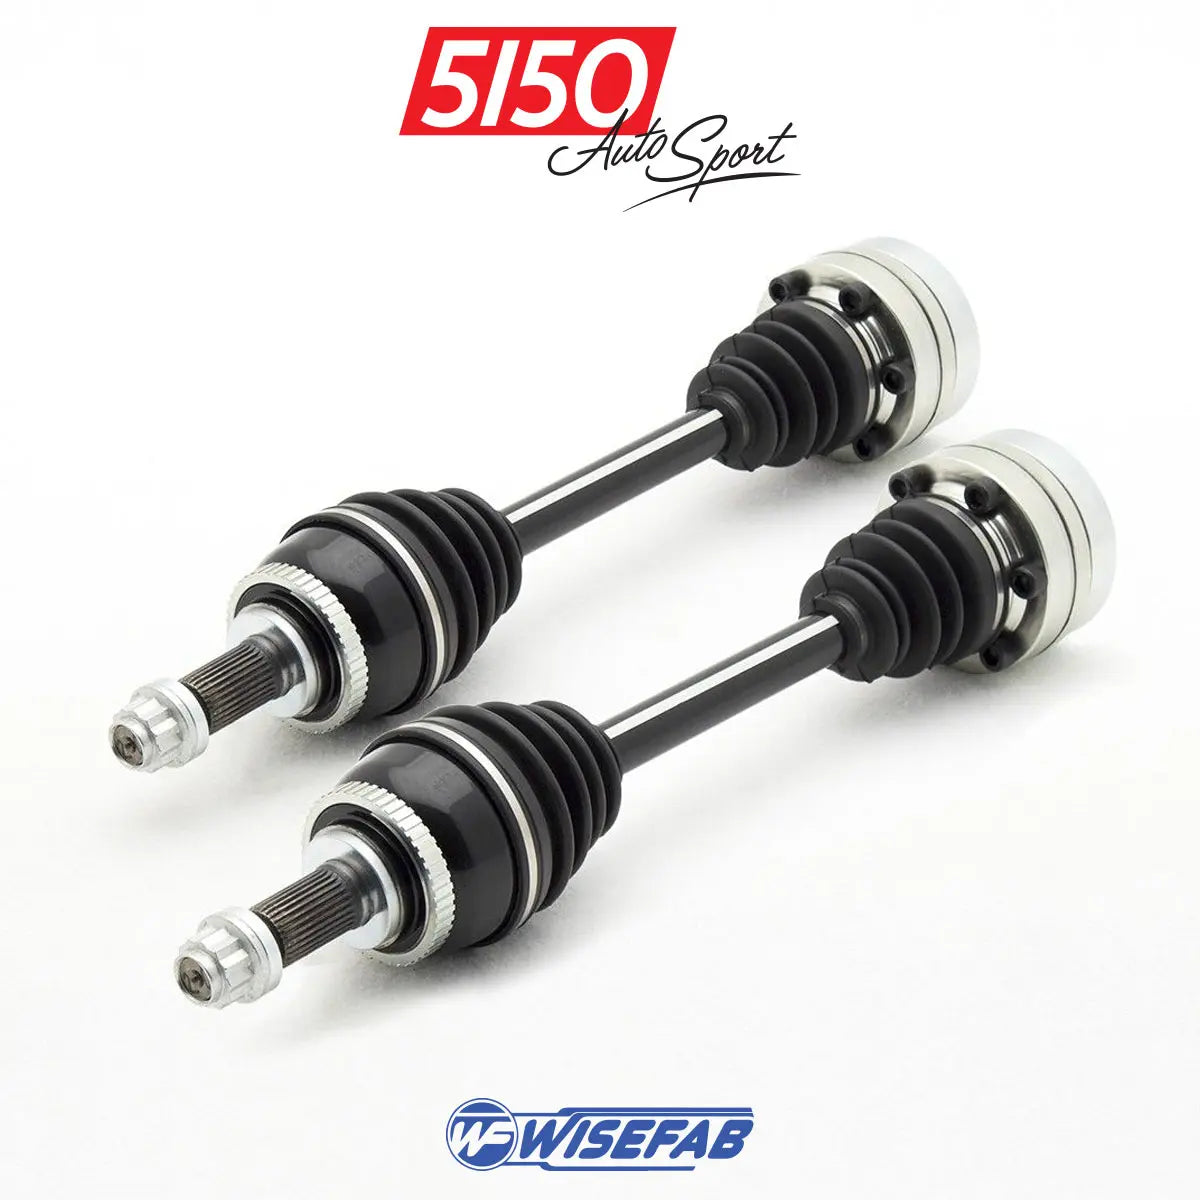 BMW F22 Rear Axles for Drift and Track Racing